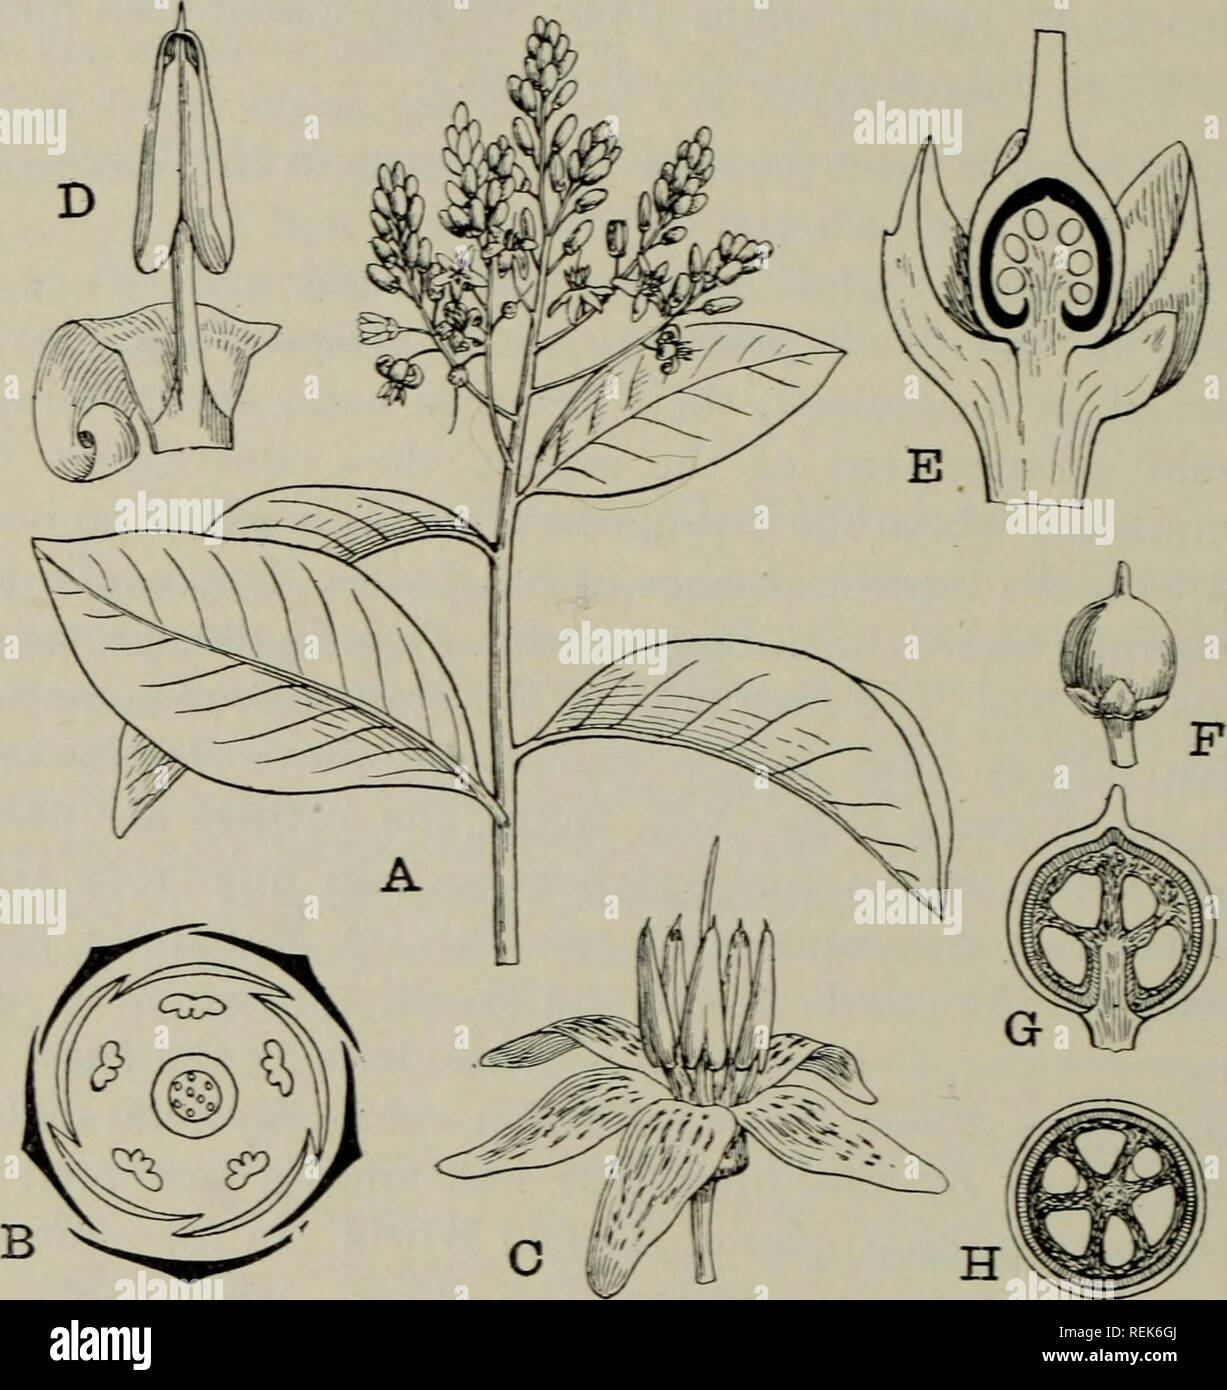 . The classification of flowering plants. Plants. 438 FLOWERIXG PLANTS bent and completely surrounded by the endosperm. Poly- embryony occurs in species of Ardisia (as A. japonica), and the germination in this genus is also of interest; A. crenata recalls that of Aegiceras in the early growth of the embryo, the radicle having ruptured the fruit-coat before the fruit has fallen. In A. crenulata and A. japonica the cotyledons. Fig. 211. Ardisia iinifolia. A. Flowering shoot, x I. B. Floral diagram. C. Flower, x 2. D. Single stamen and j)etal, x 4. E. Ovary and calyx in longitudinal section, x 8. Stock Photo